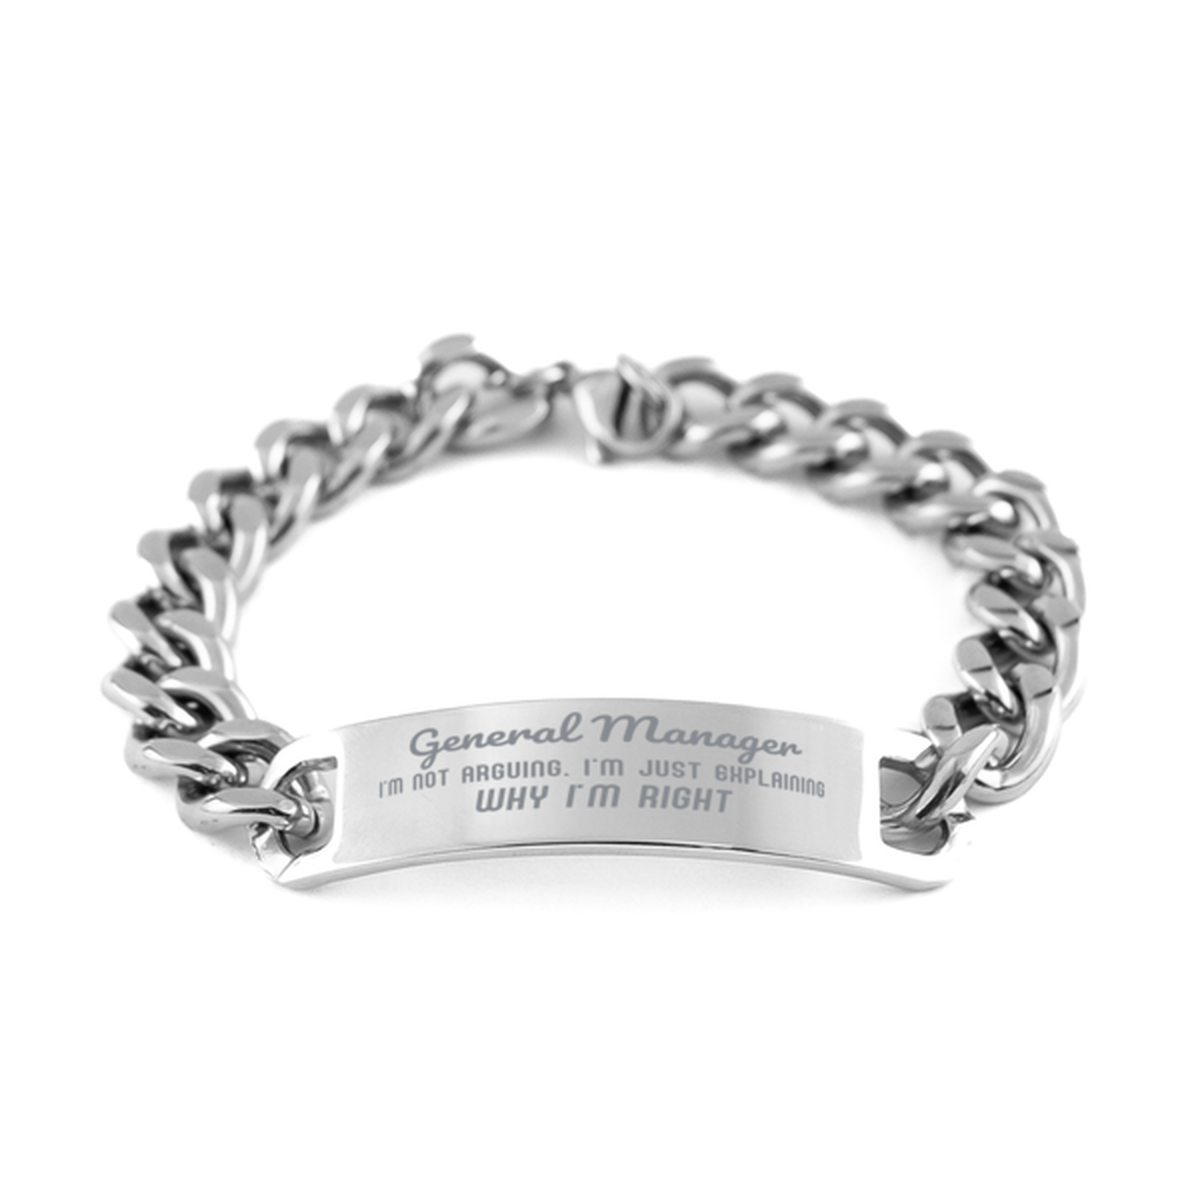 General Manager I'm not Arguing. I'm Just Explaining Why I'm RIGHT Cuban Chain Stainless Steel Bracelet, Graduation Birthday Christmas General Manager Gifts For General Manager Funny Saying Quote Present for Men Women Coworker